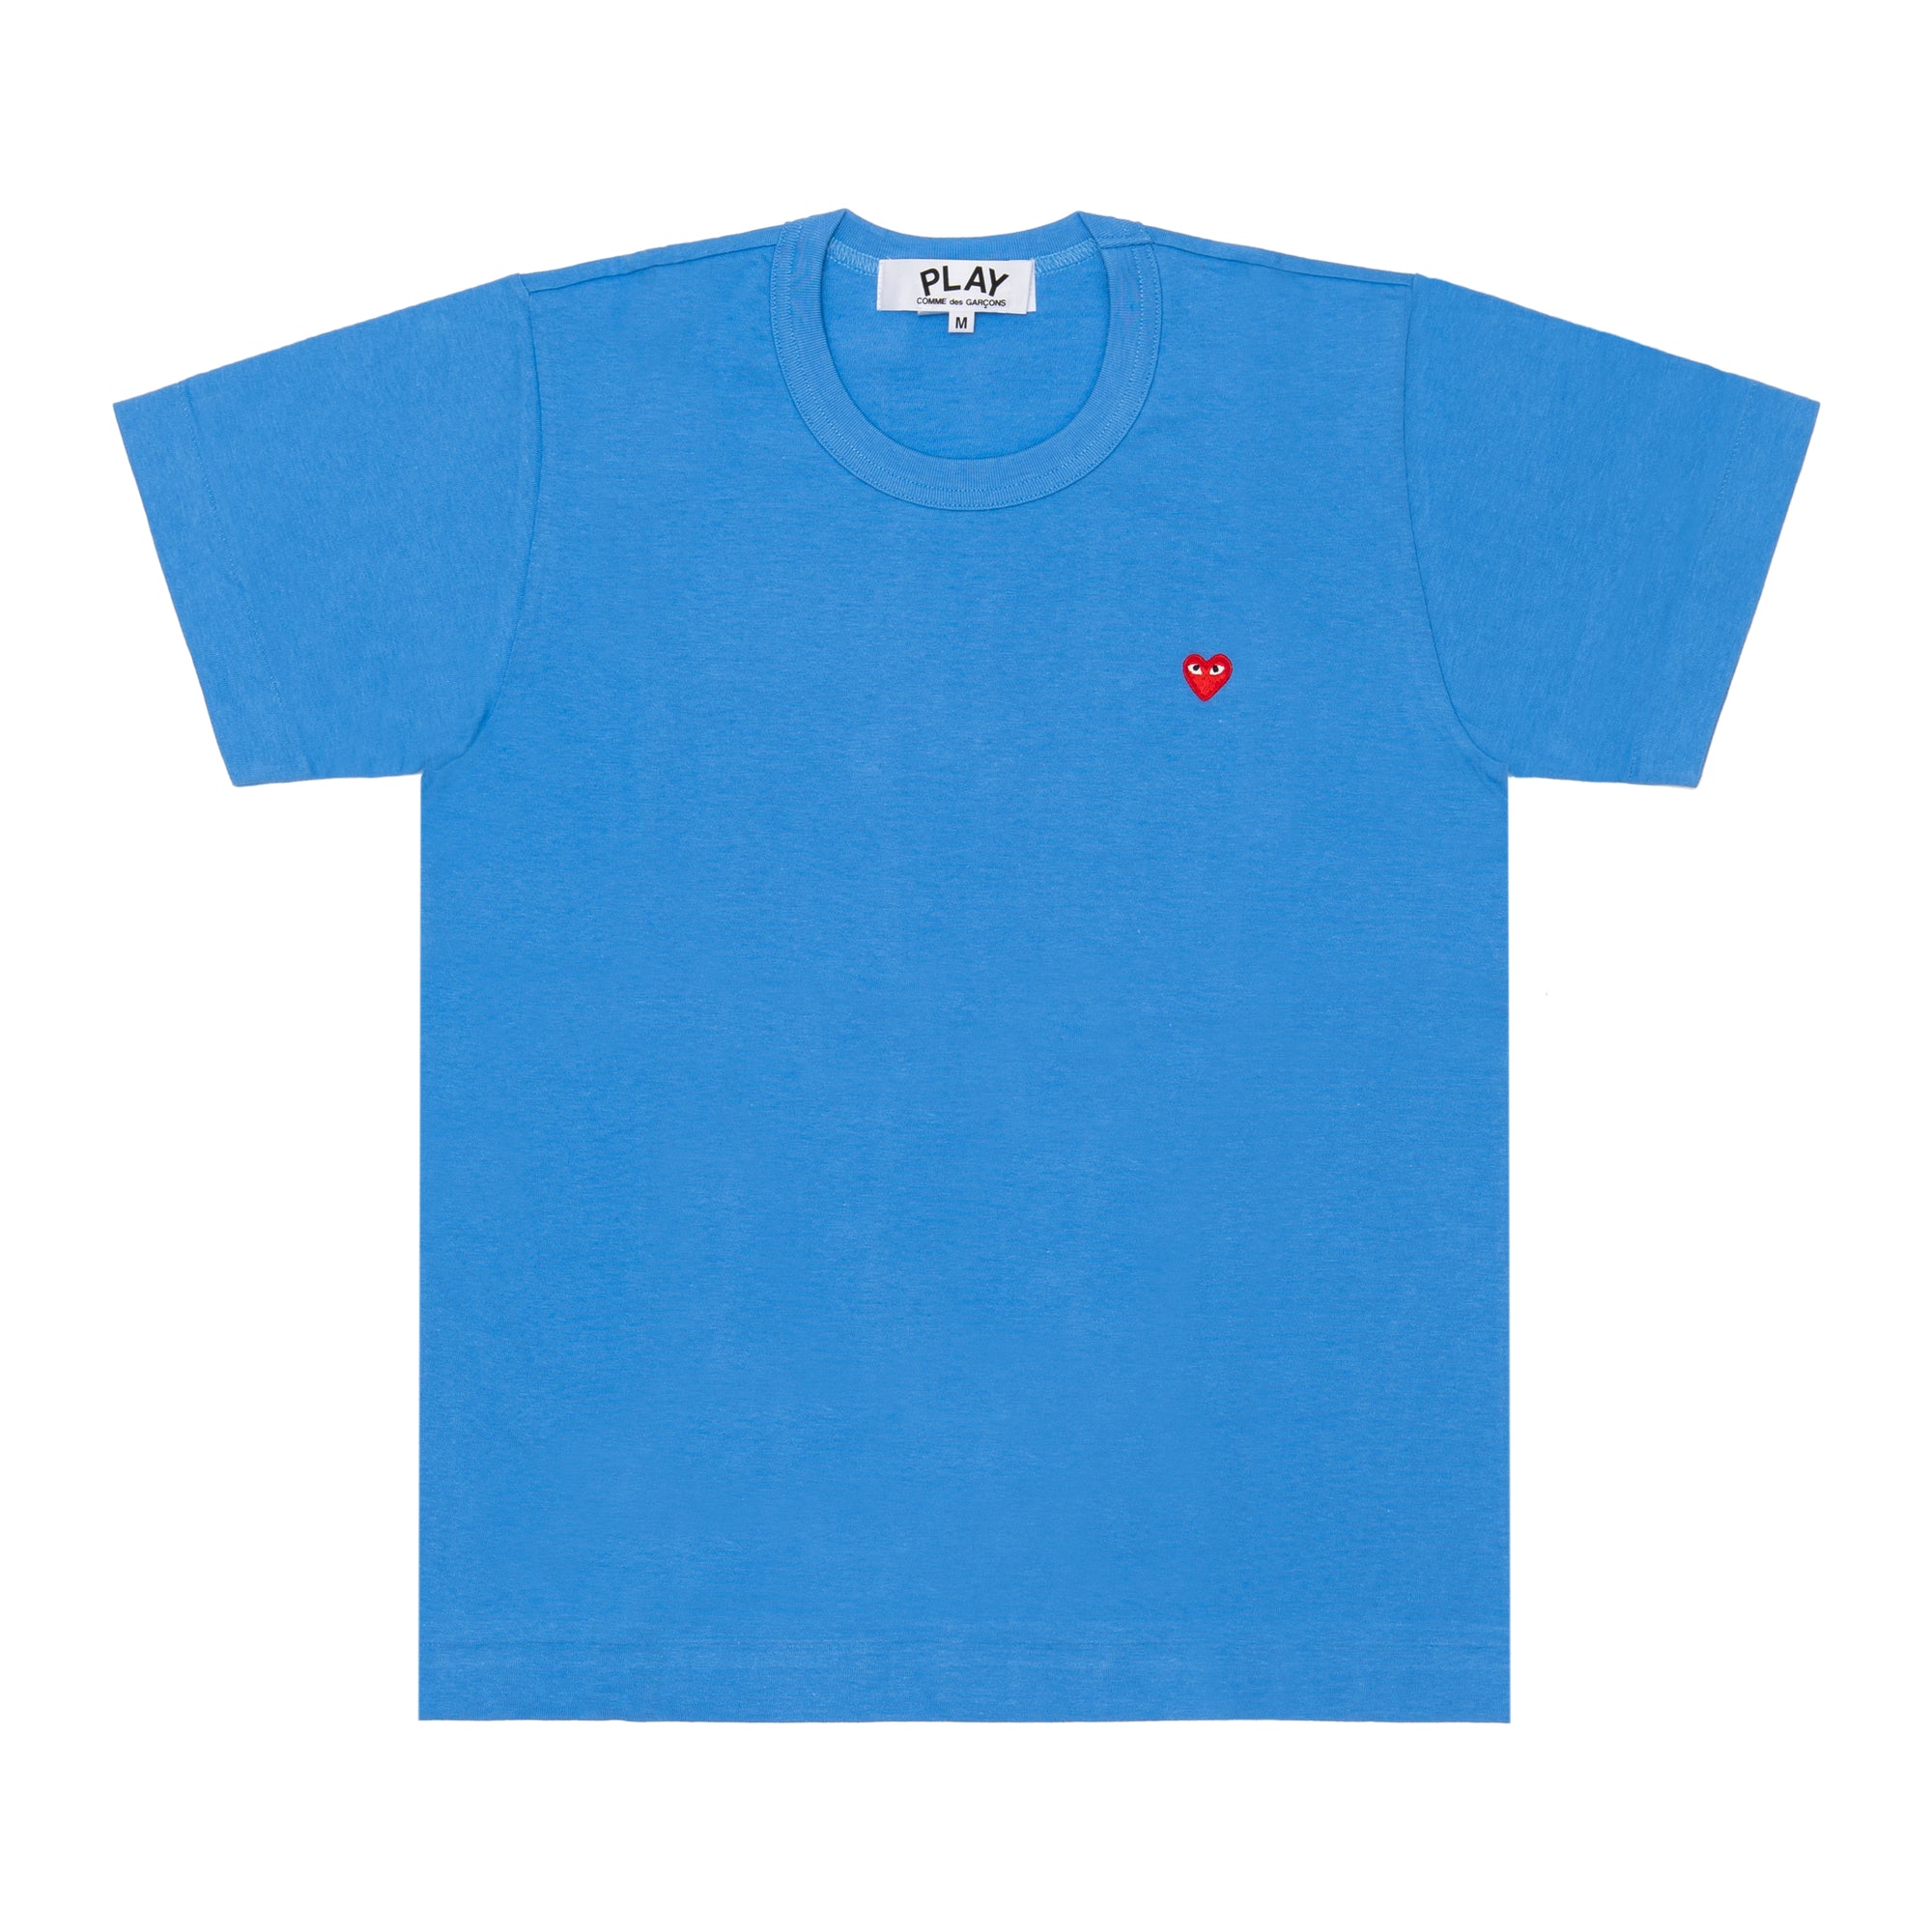 PLAY CDG - Small Red Heart S/S T-Shirt - (Blue) view 1